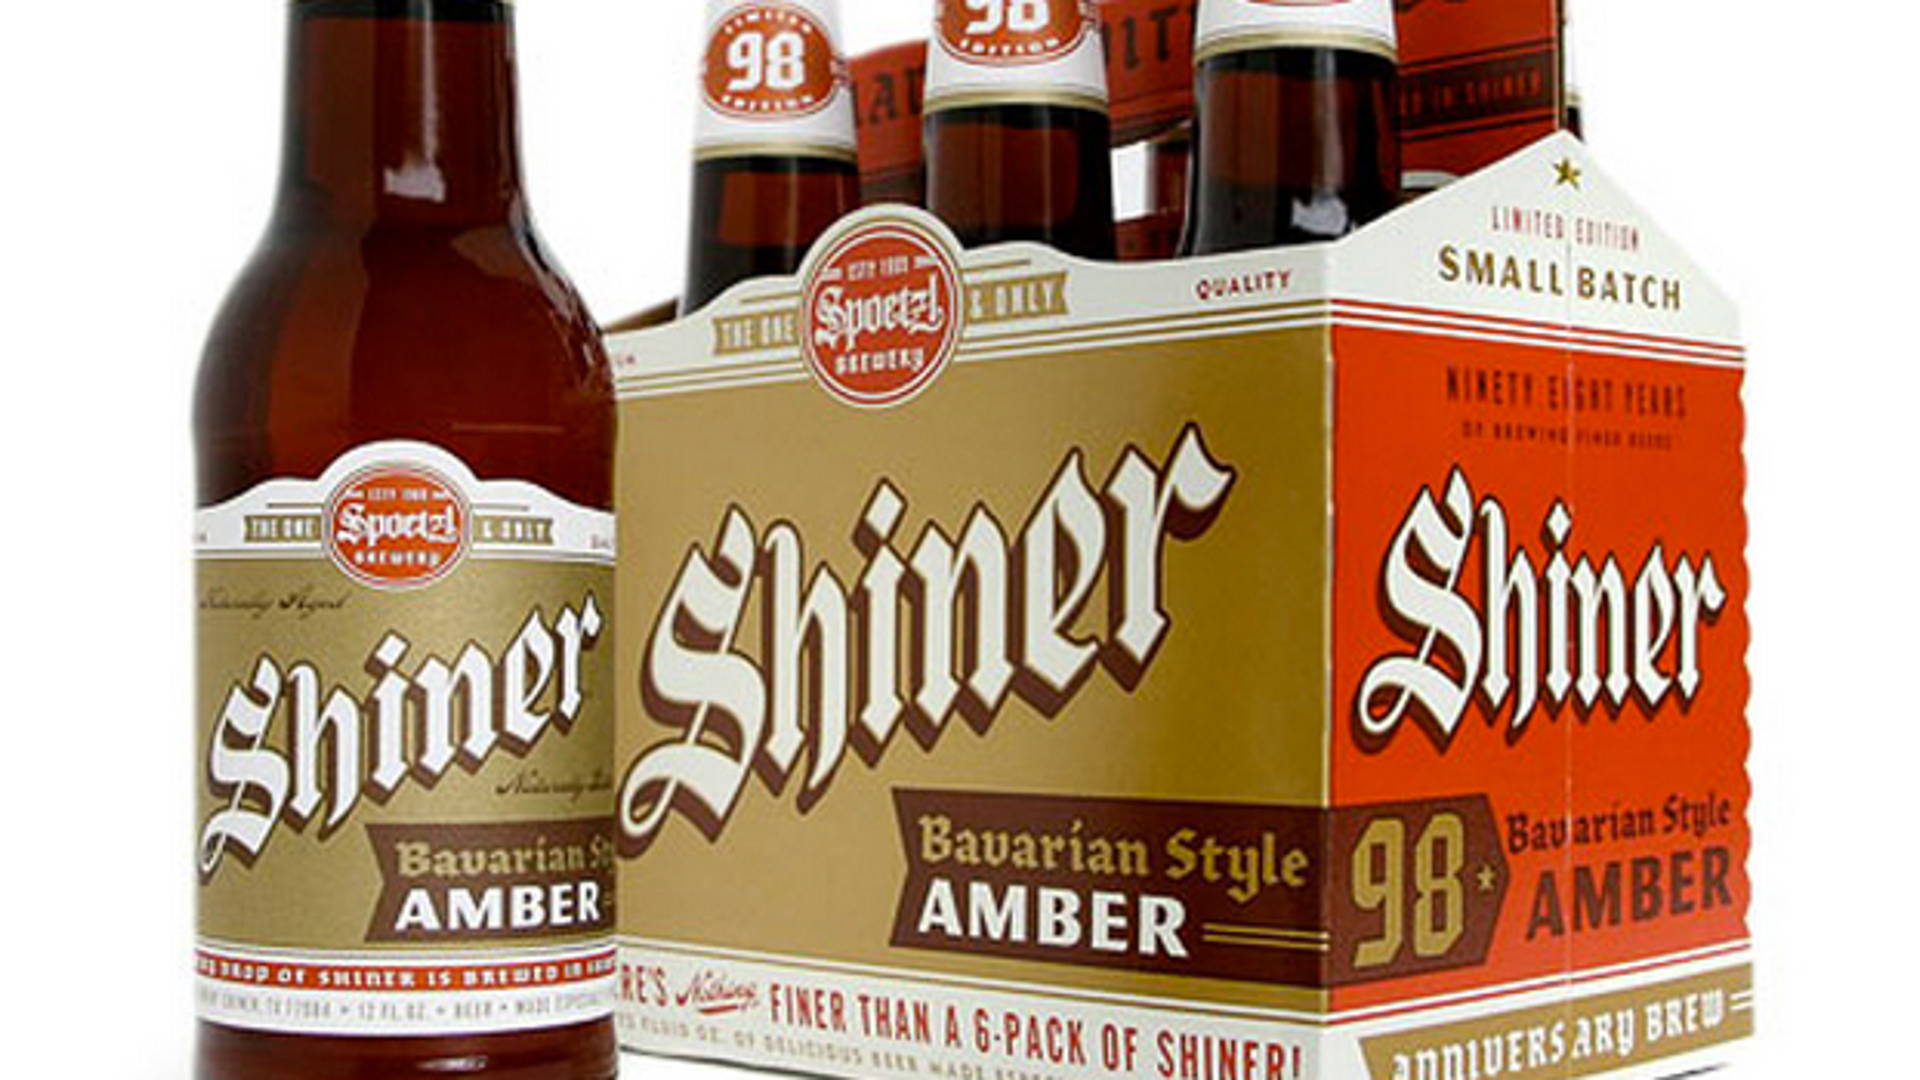 Featured image for Shiner 98 Bavarian Amber